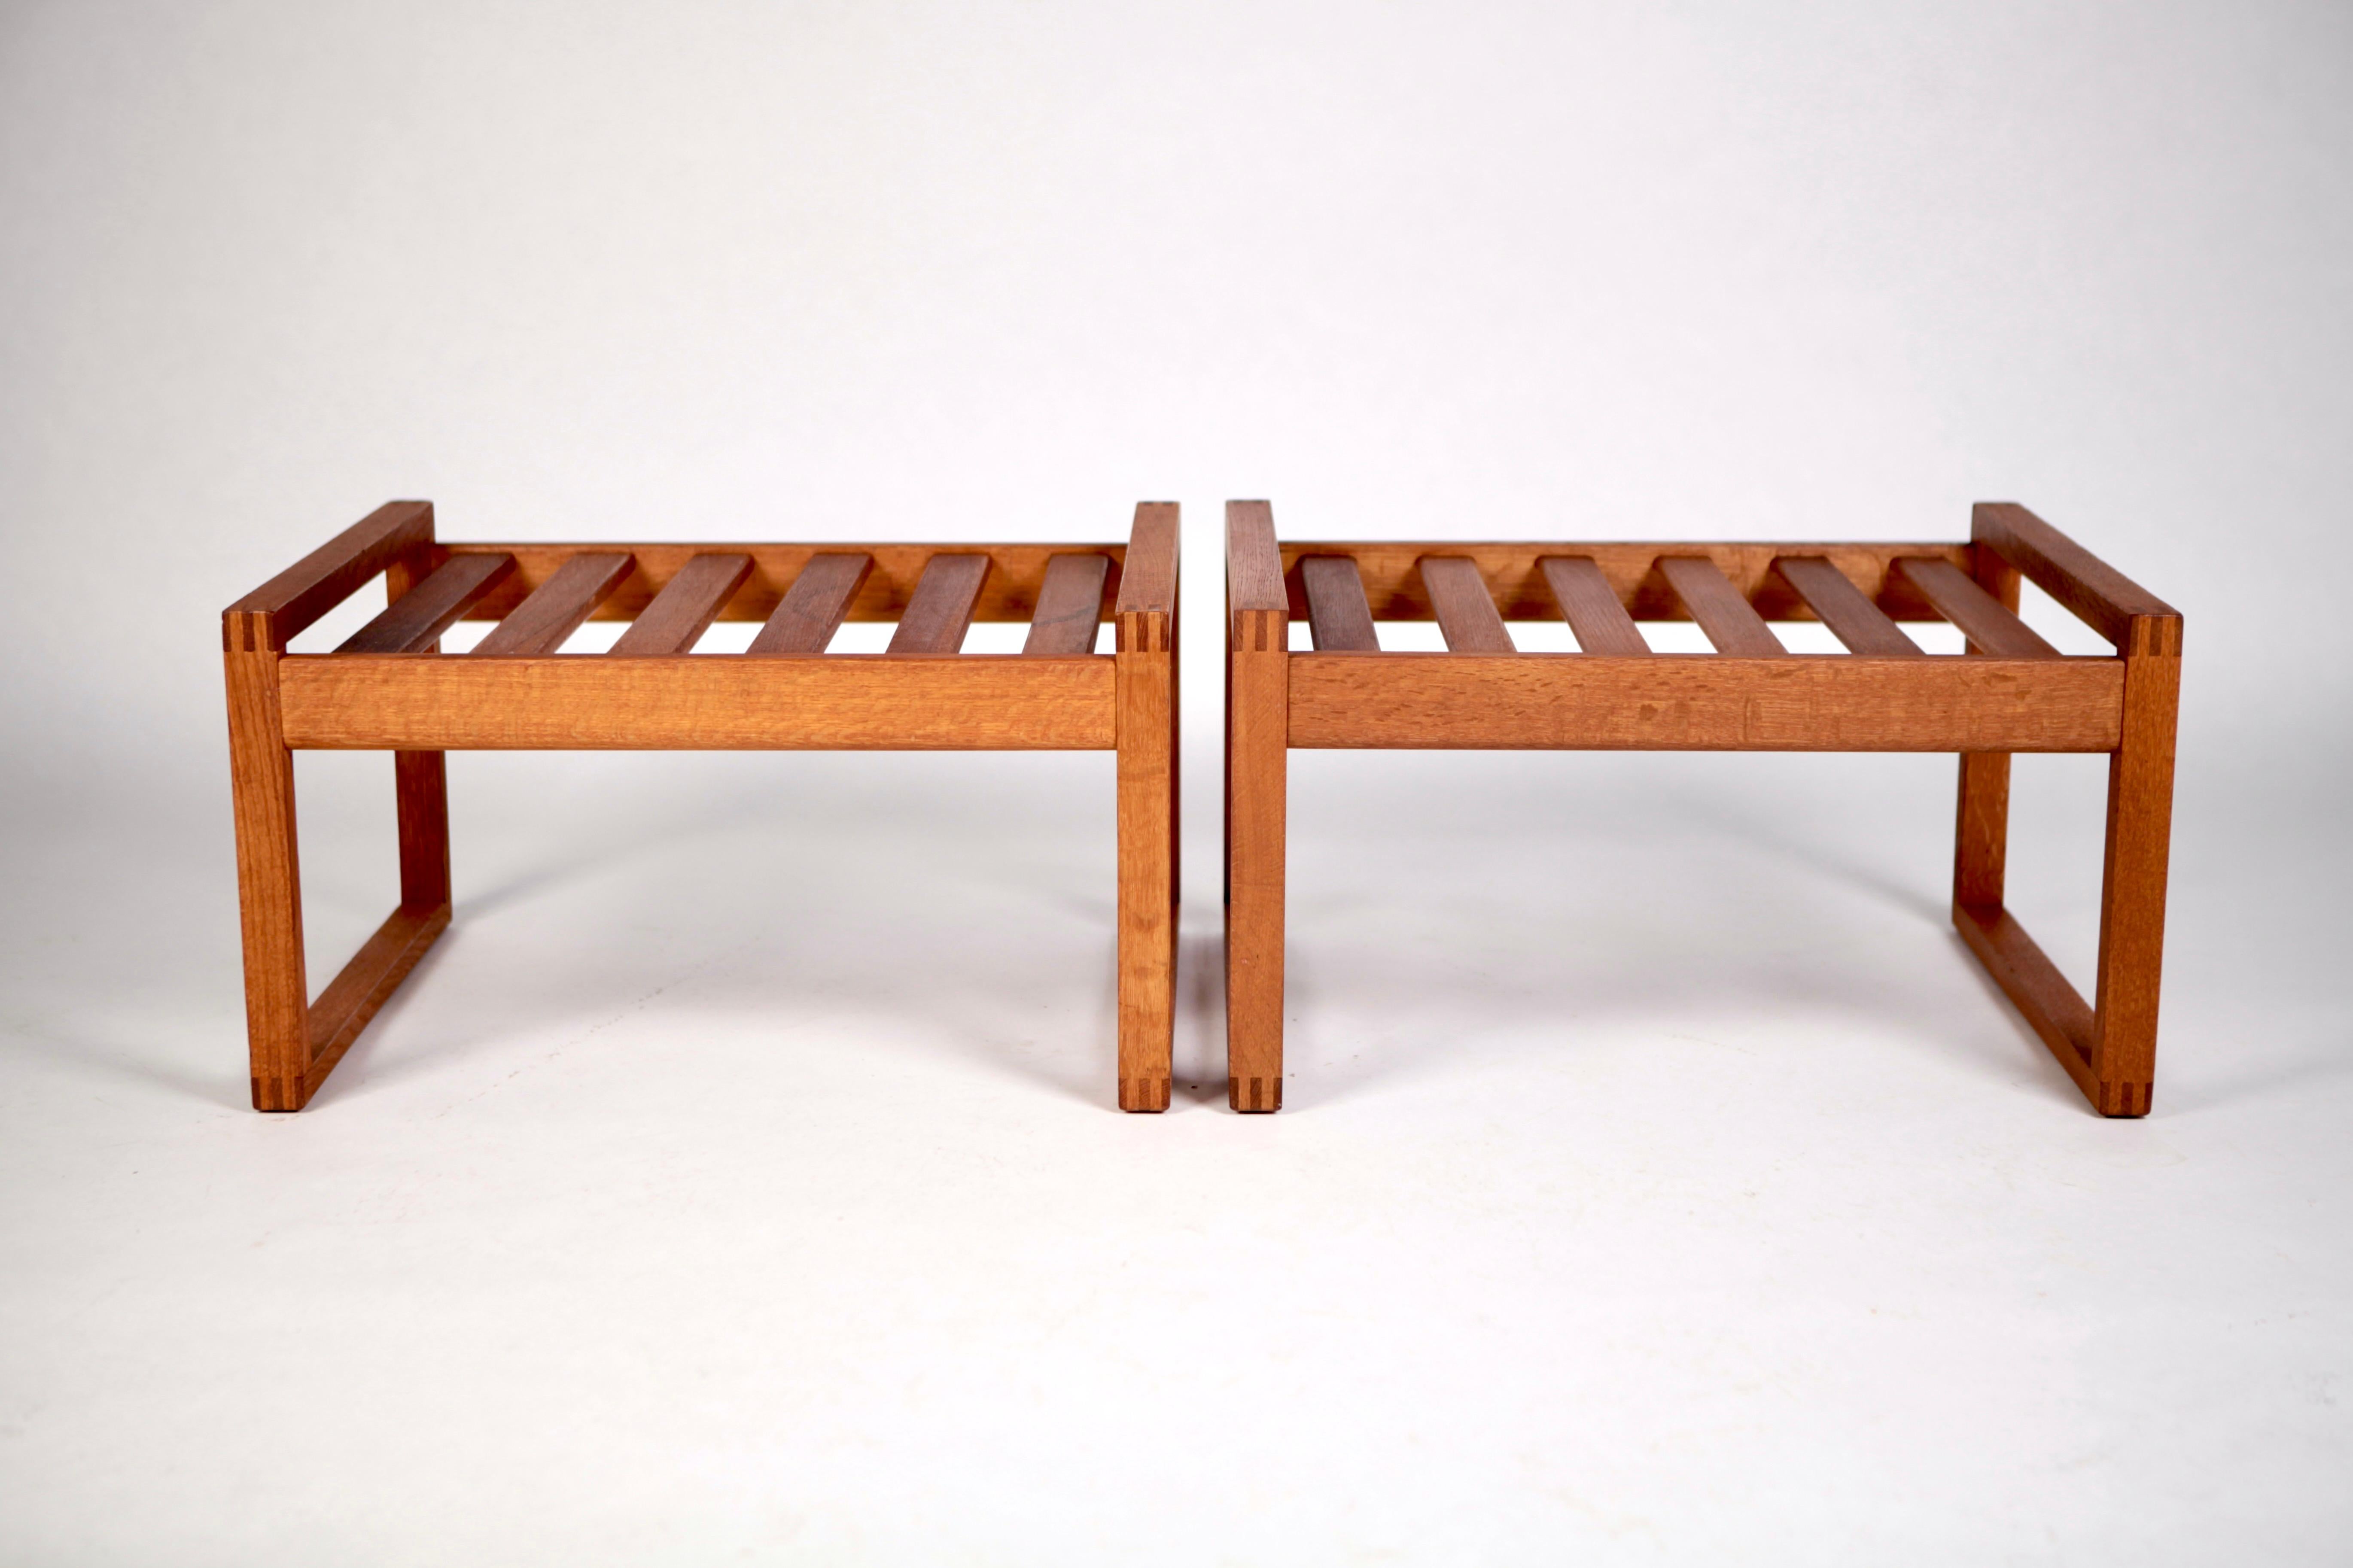 A pair of benches or side-tables in solid oak, designed by Børge Mogensen, executed by Frederica Stølefabrik in the 1960s in Denmark.
Model 2248.
Excellent refinished vintage condition.
 